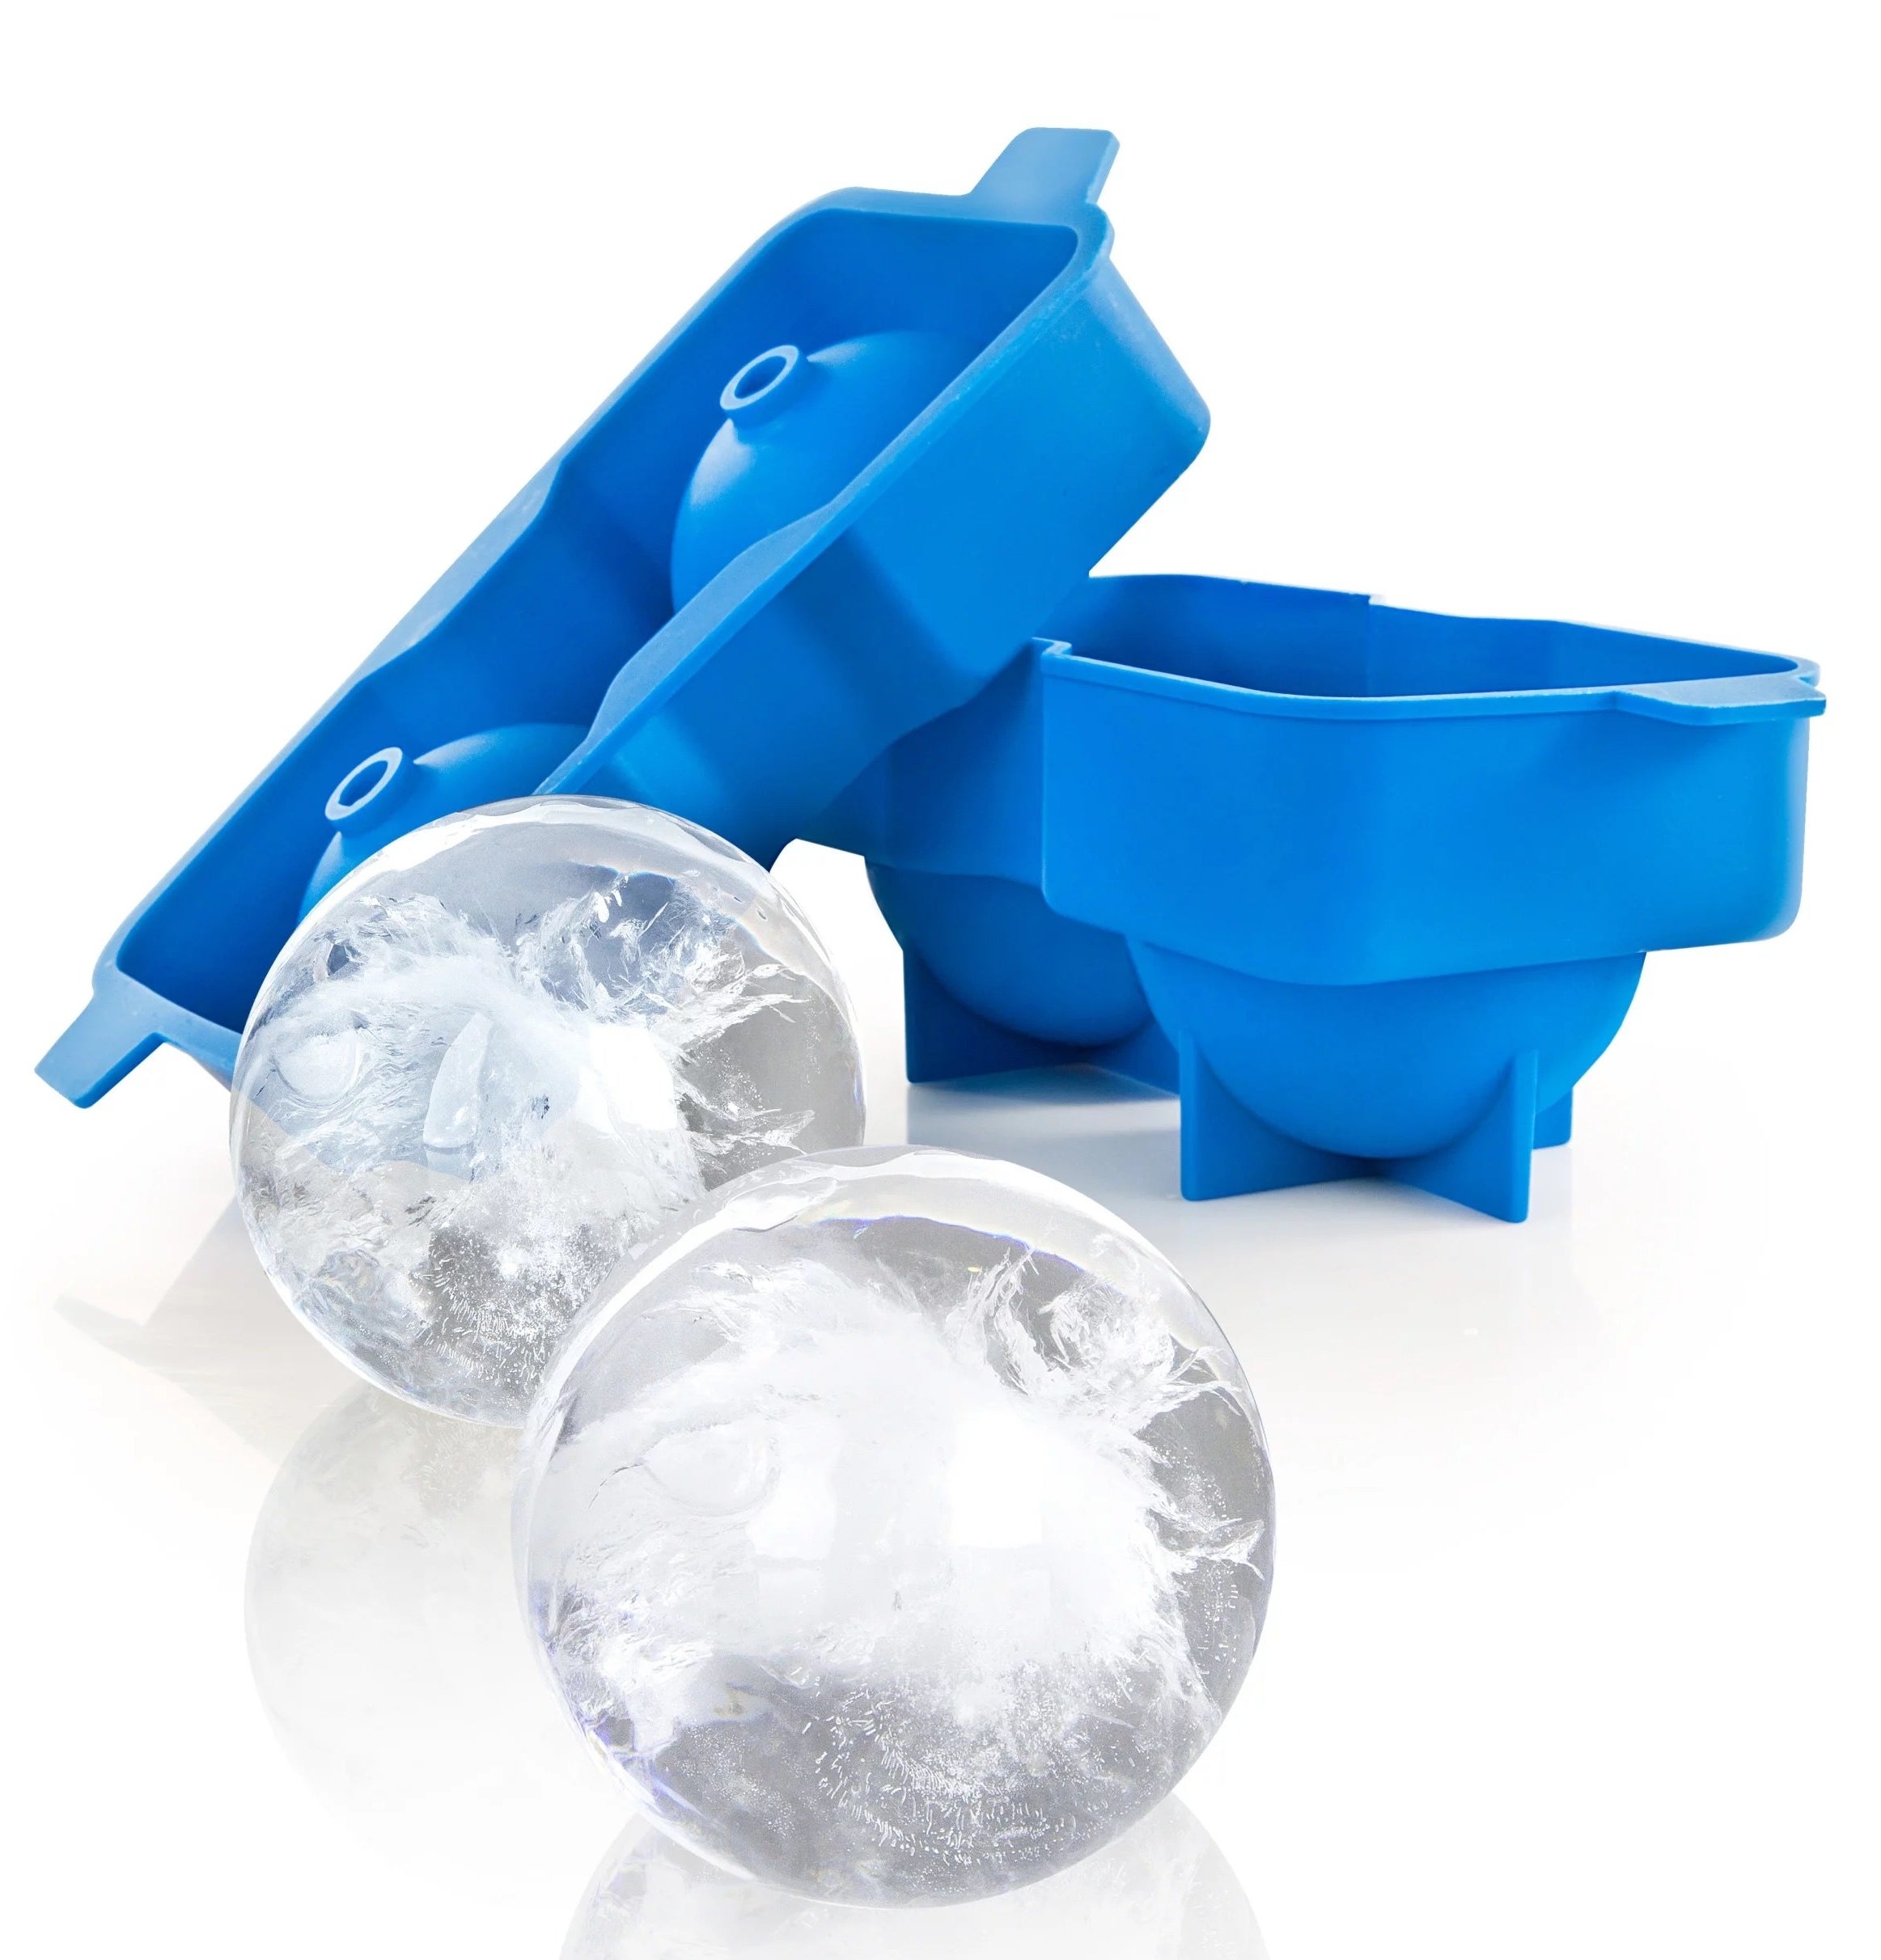 a blue ice ball tray with two ice cubes in a ball form